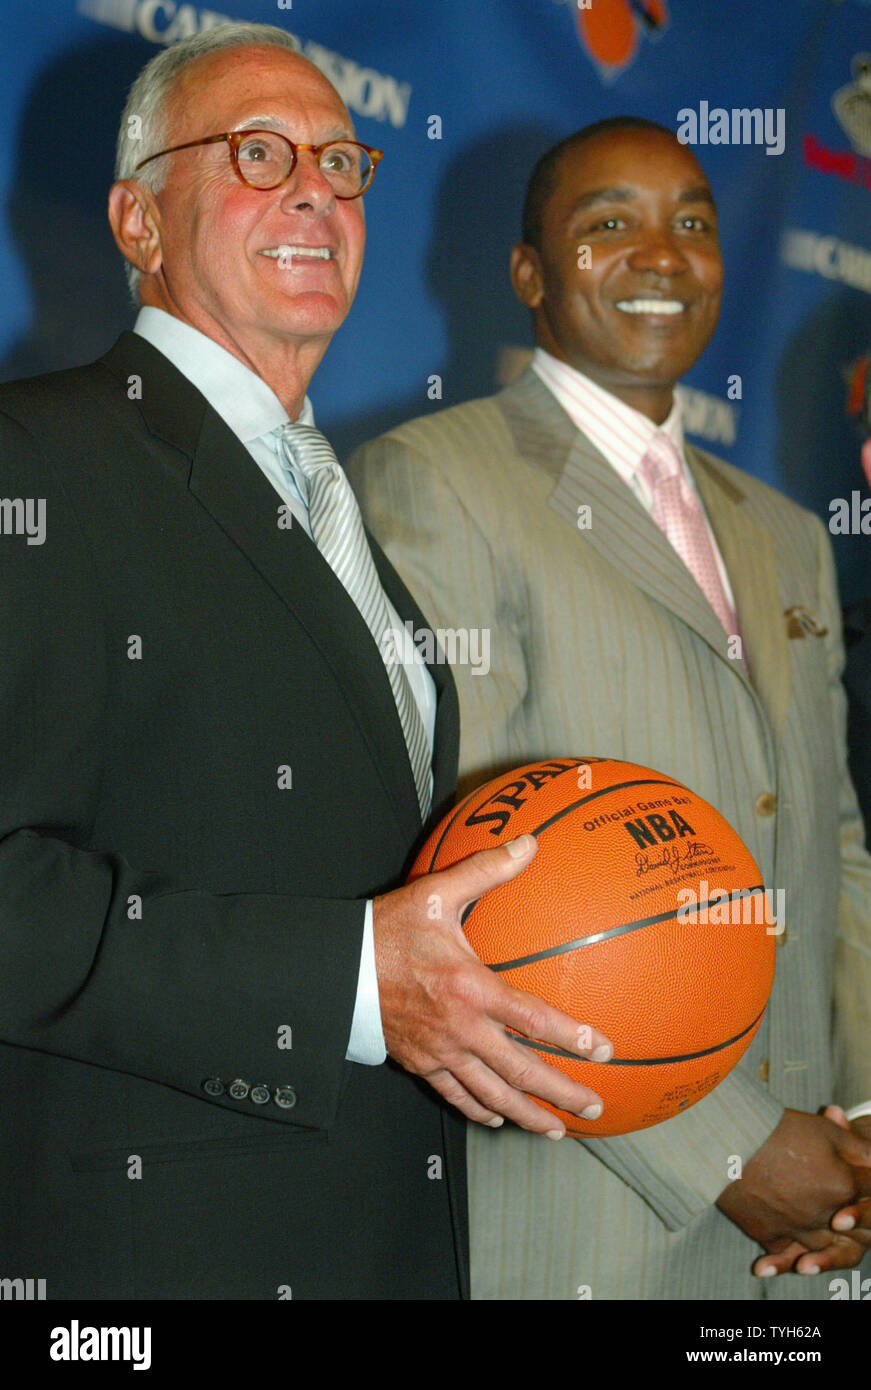 Basketball Hall of Famer Larry Brown, left, stands by New York Knick's president Isiah Thomas after the Knicks accounce that Brown is their new head coach during a press conference at Madison Square Garden on July 28, 2005 in New York City. Brown, former coach for the Detroit Pistons, will be the highest paid basketball coach ever, receiving over $10 million a year.  (UPI Photo/Monika Graff) Stock Photo